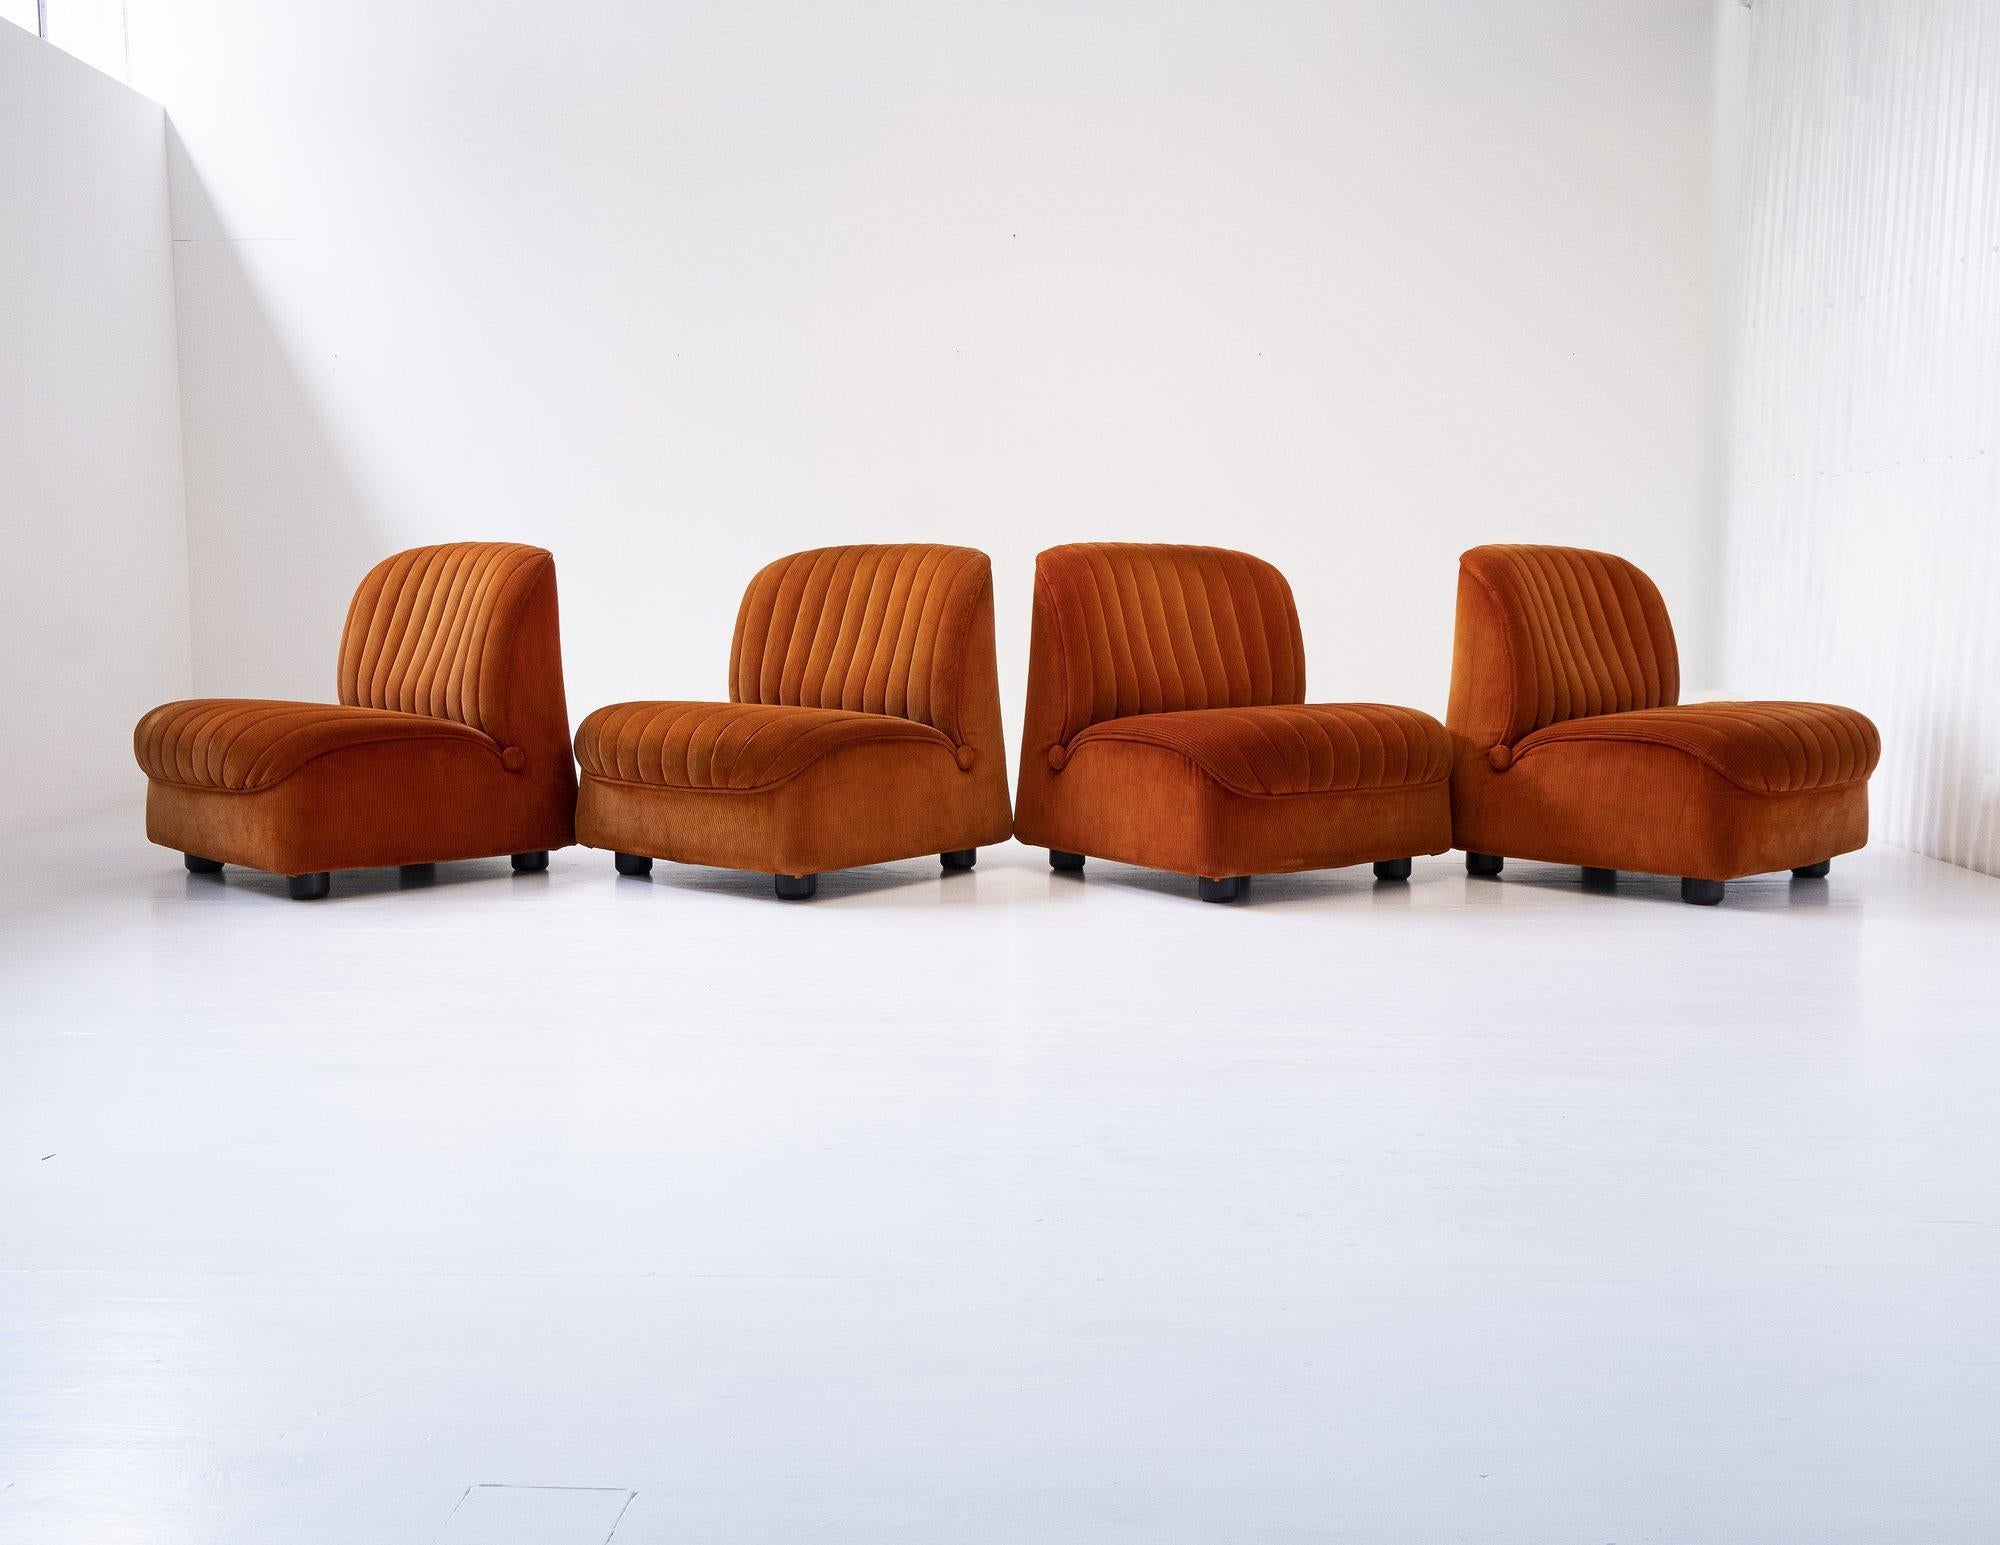 Beautiful and chic set of 4 Ciprea armchairs by the legendary Afra and Tobia Scarpa for Cassina. Made in Italy in 1968, covered with original burnt orange velvet. A predecessor to the Bambole Sofa by Mario Bellini, these chairs stand alone